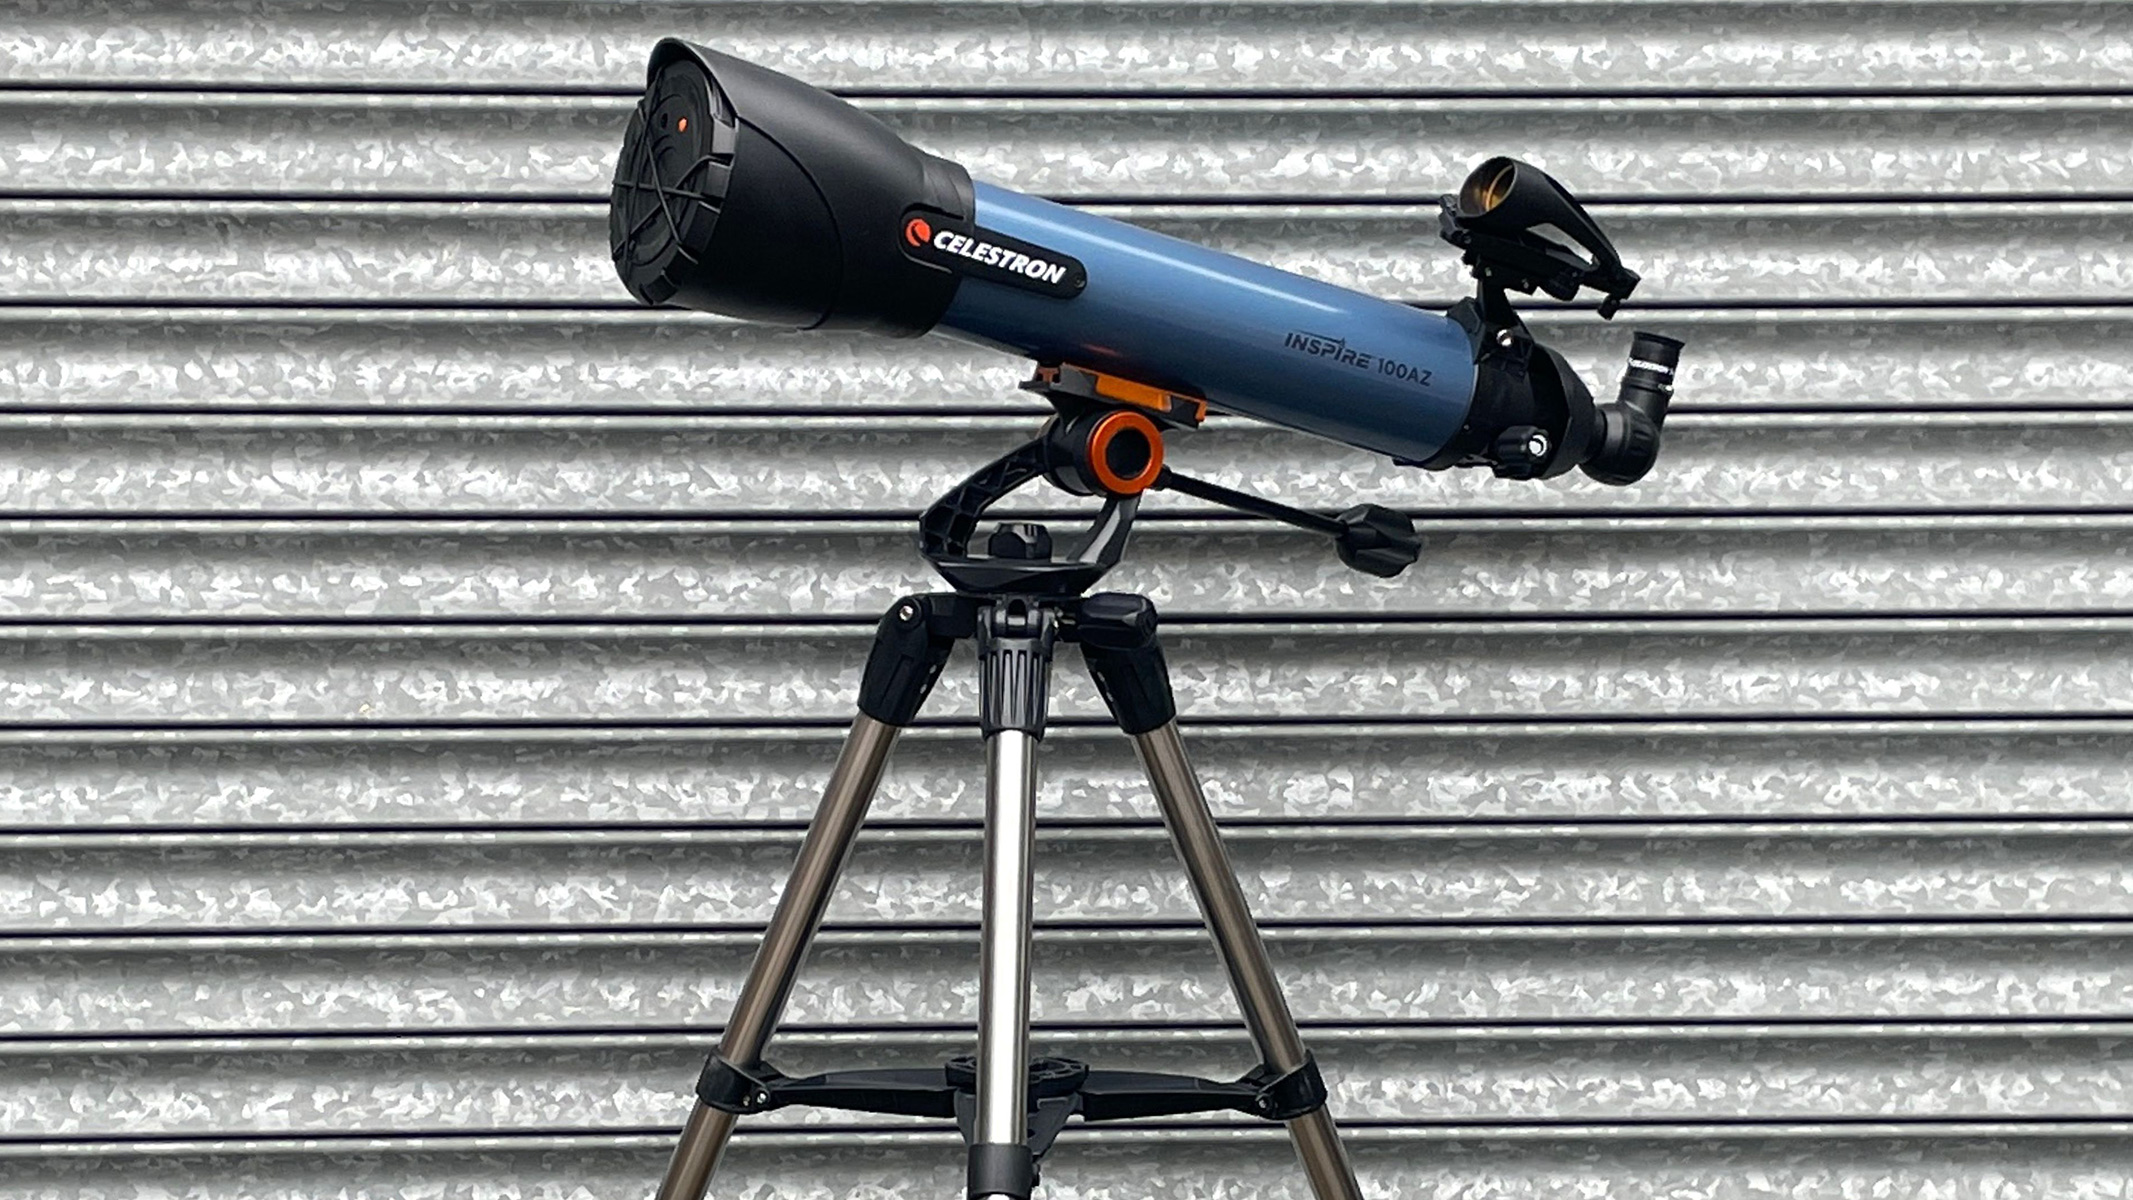 A side profile view of the telescope against a corrugated iron backdrop